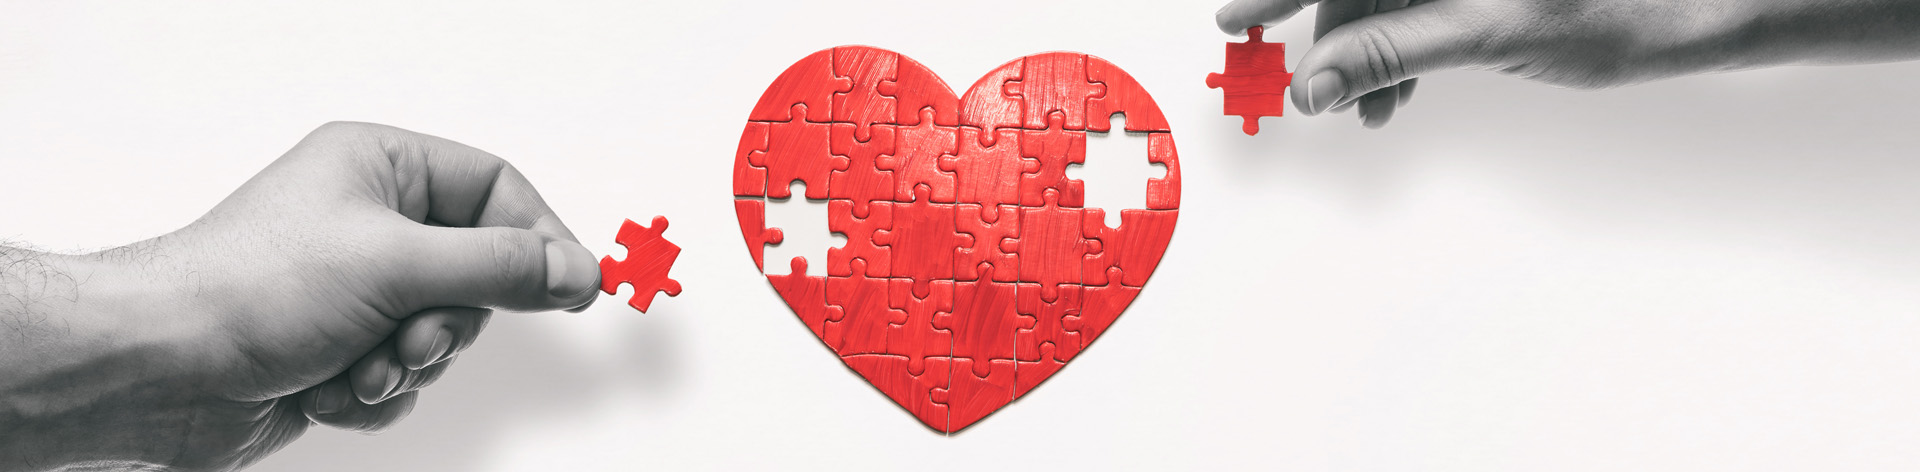 Two hands work together to finish a red heart puzzle.